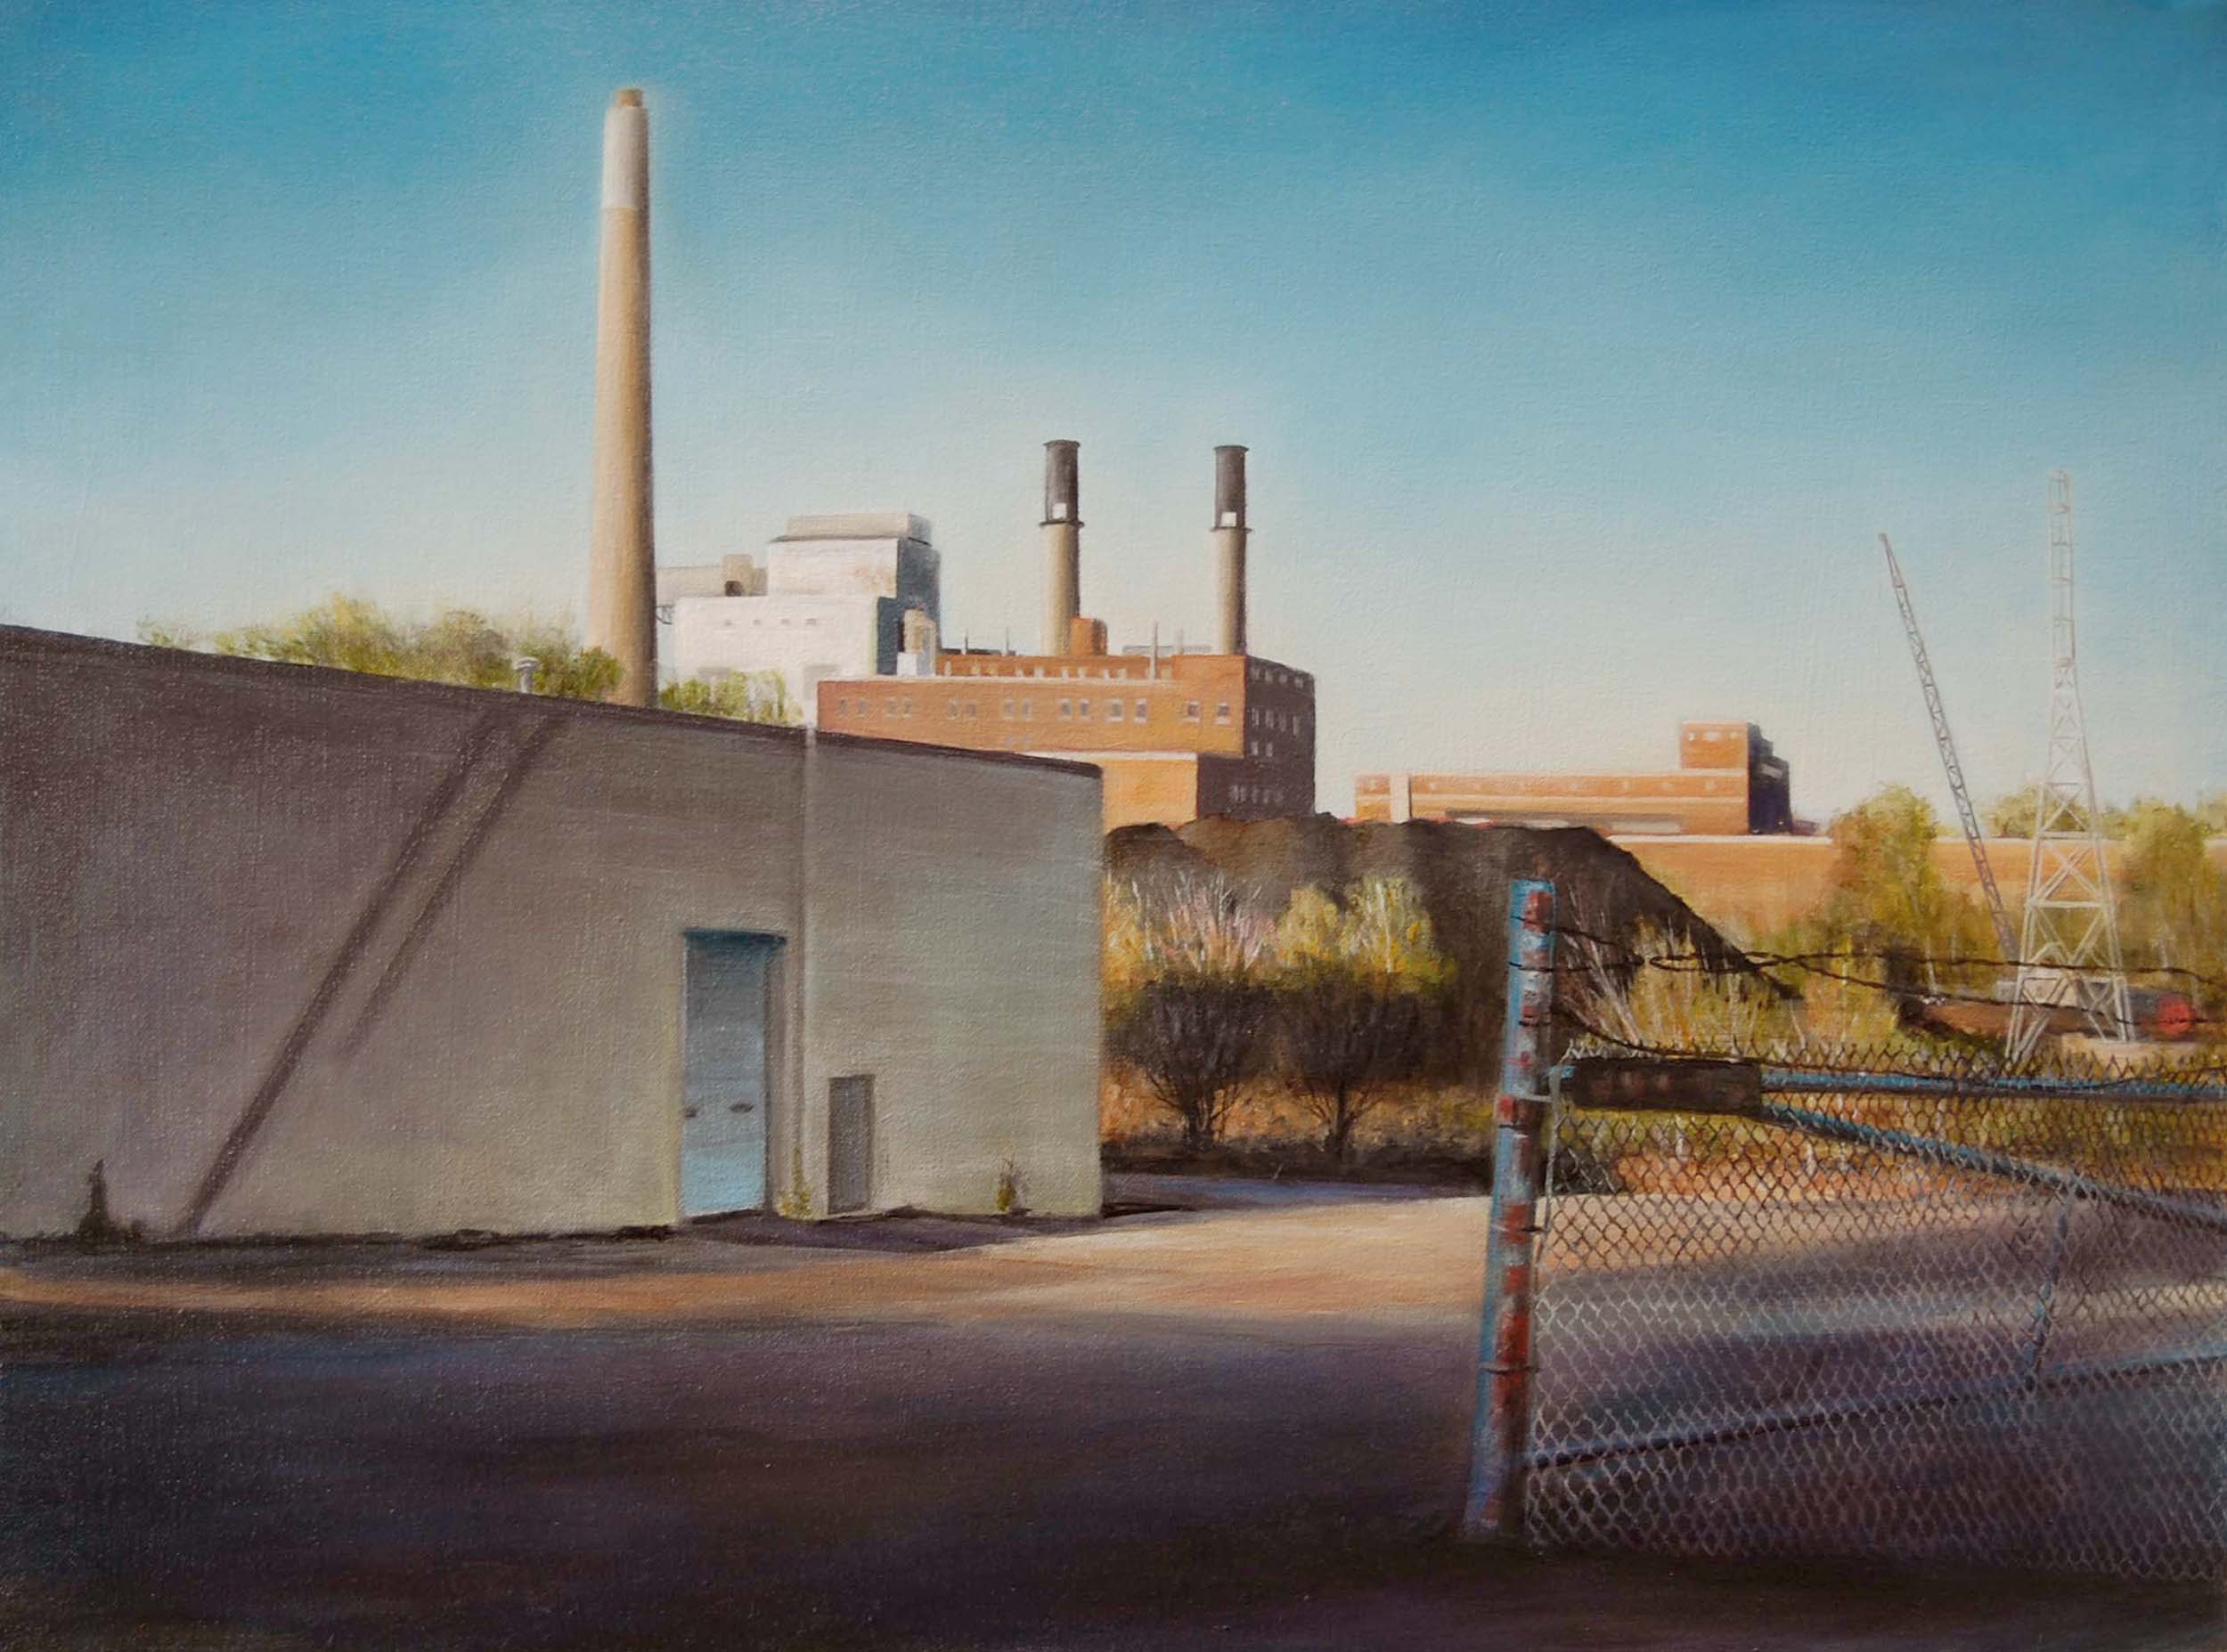   Riverside Power Station,    Minneapolis   2008  Oil on canvas  18 x 24 inches    